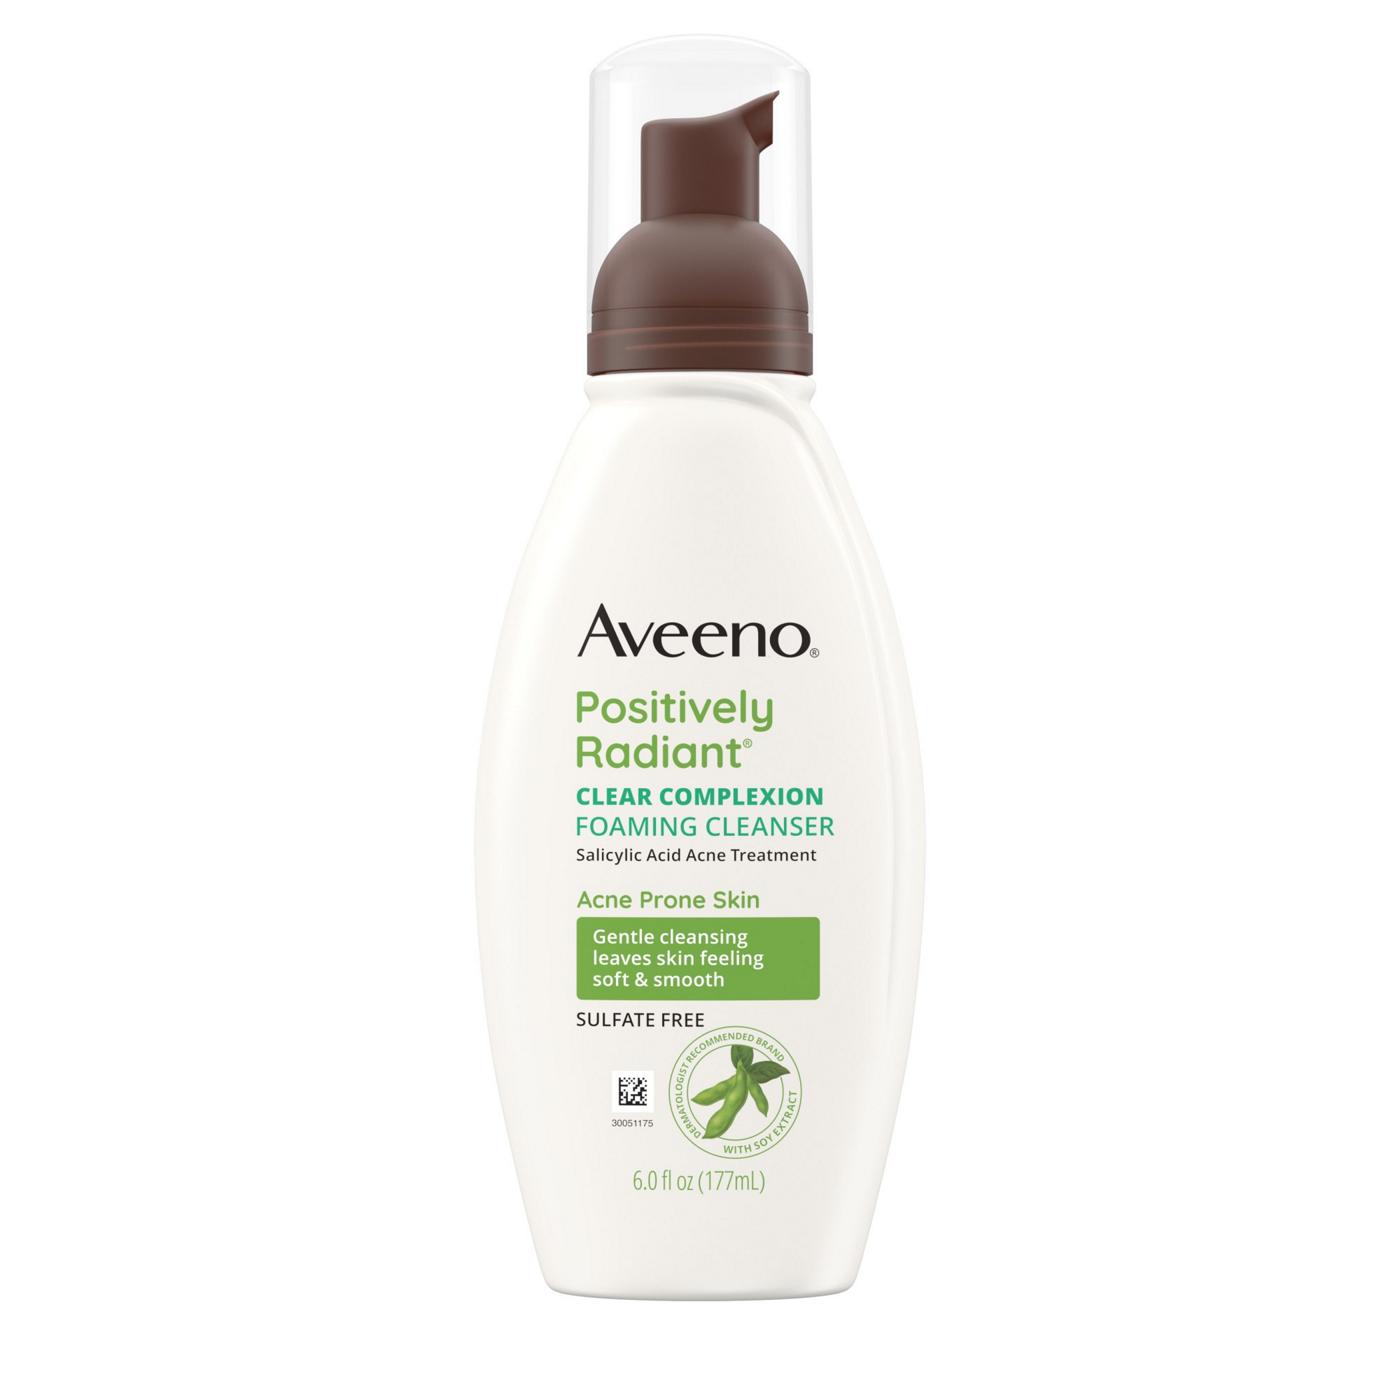 Aveeno Positively Radiant Clear Complexion Foaming Cleanser; image 1 of 6